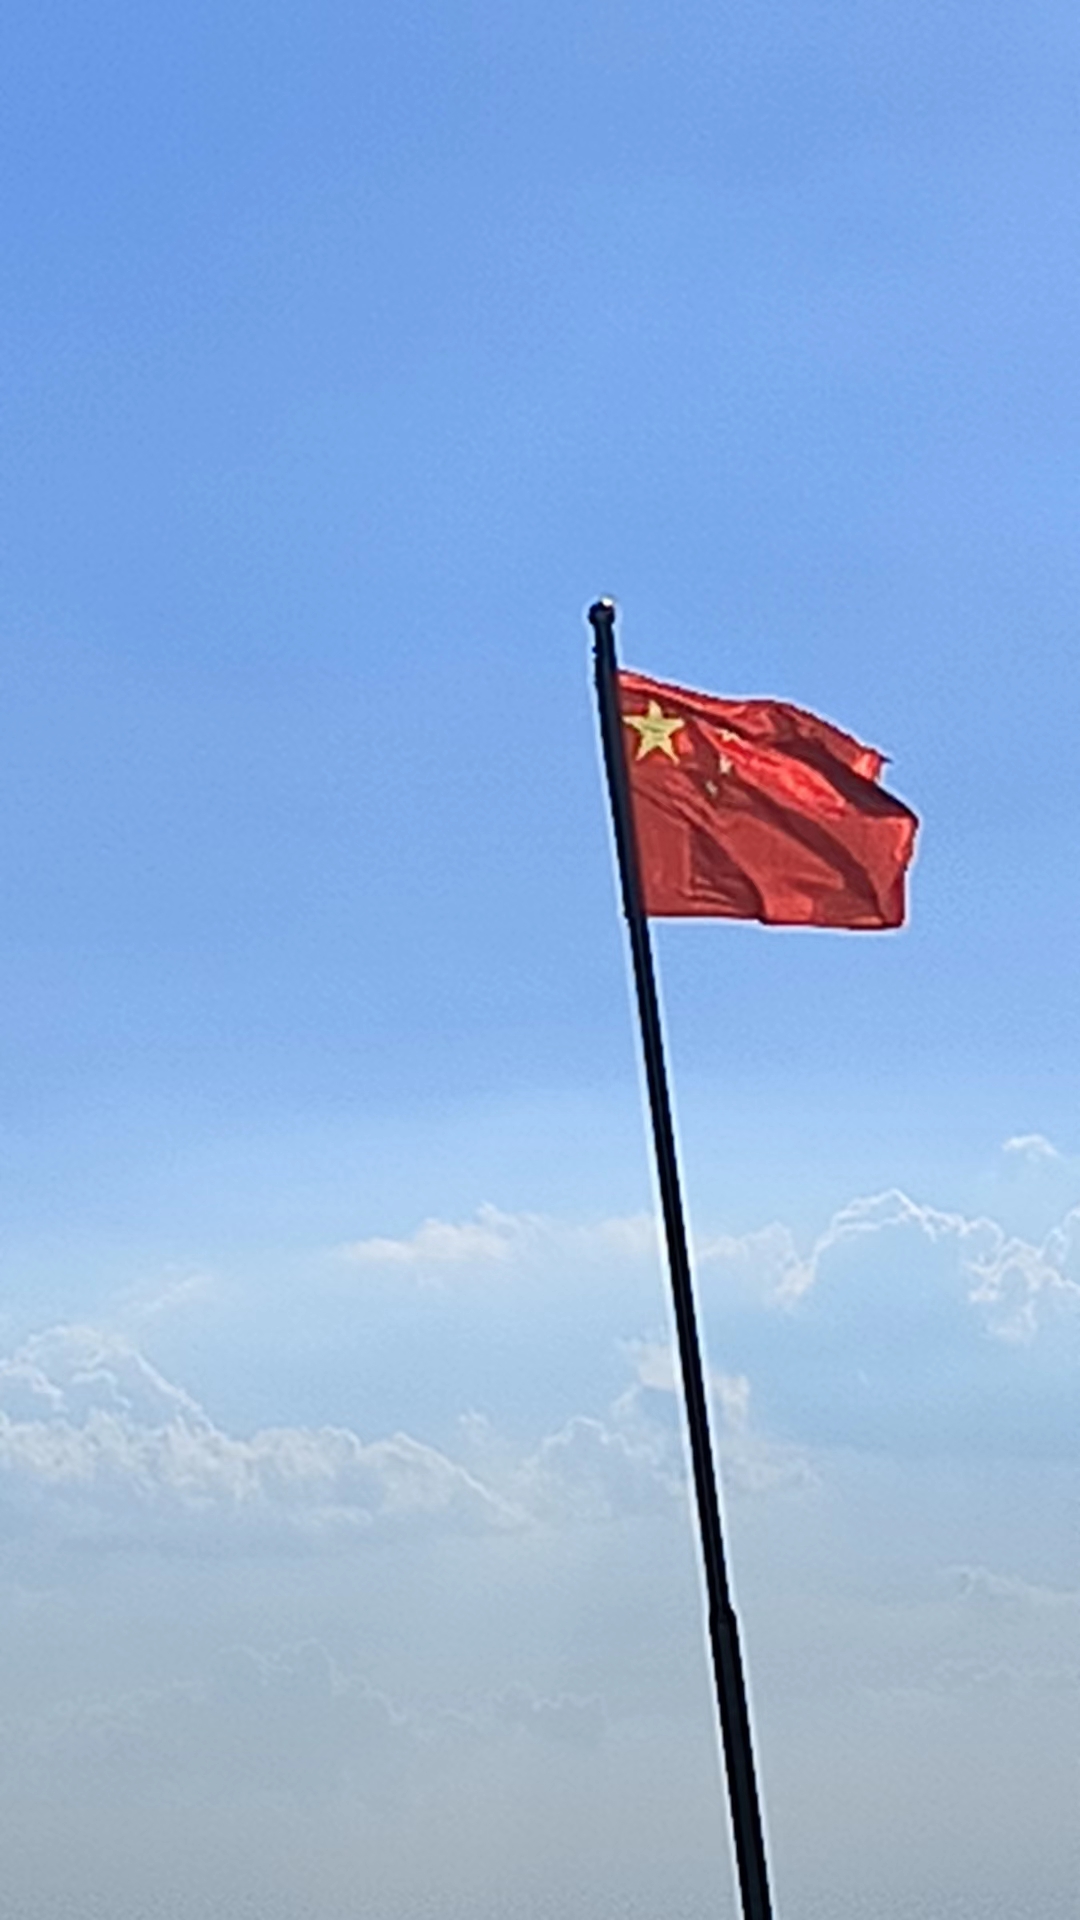 <span style='color:red;'>回首</span><span style='color:red;'>2023</span>，厉兵秣马，启航<span style='color:red;'>2024</span>